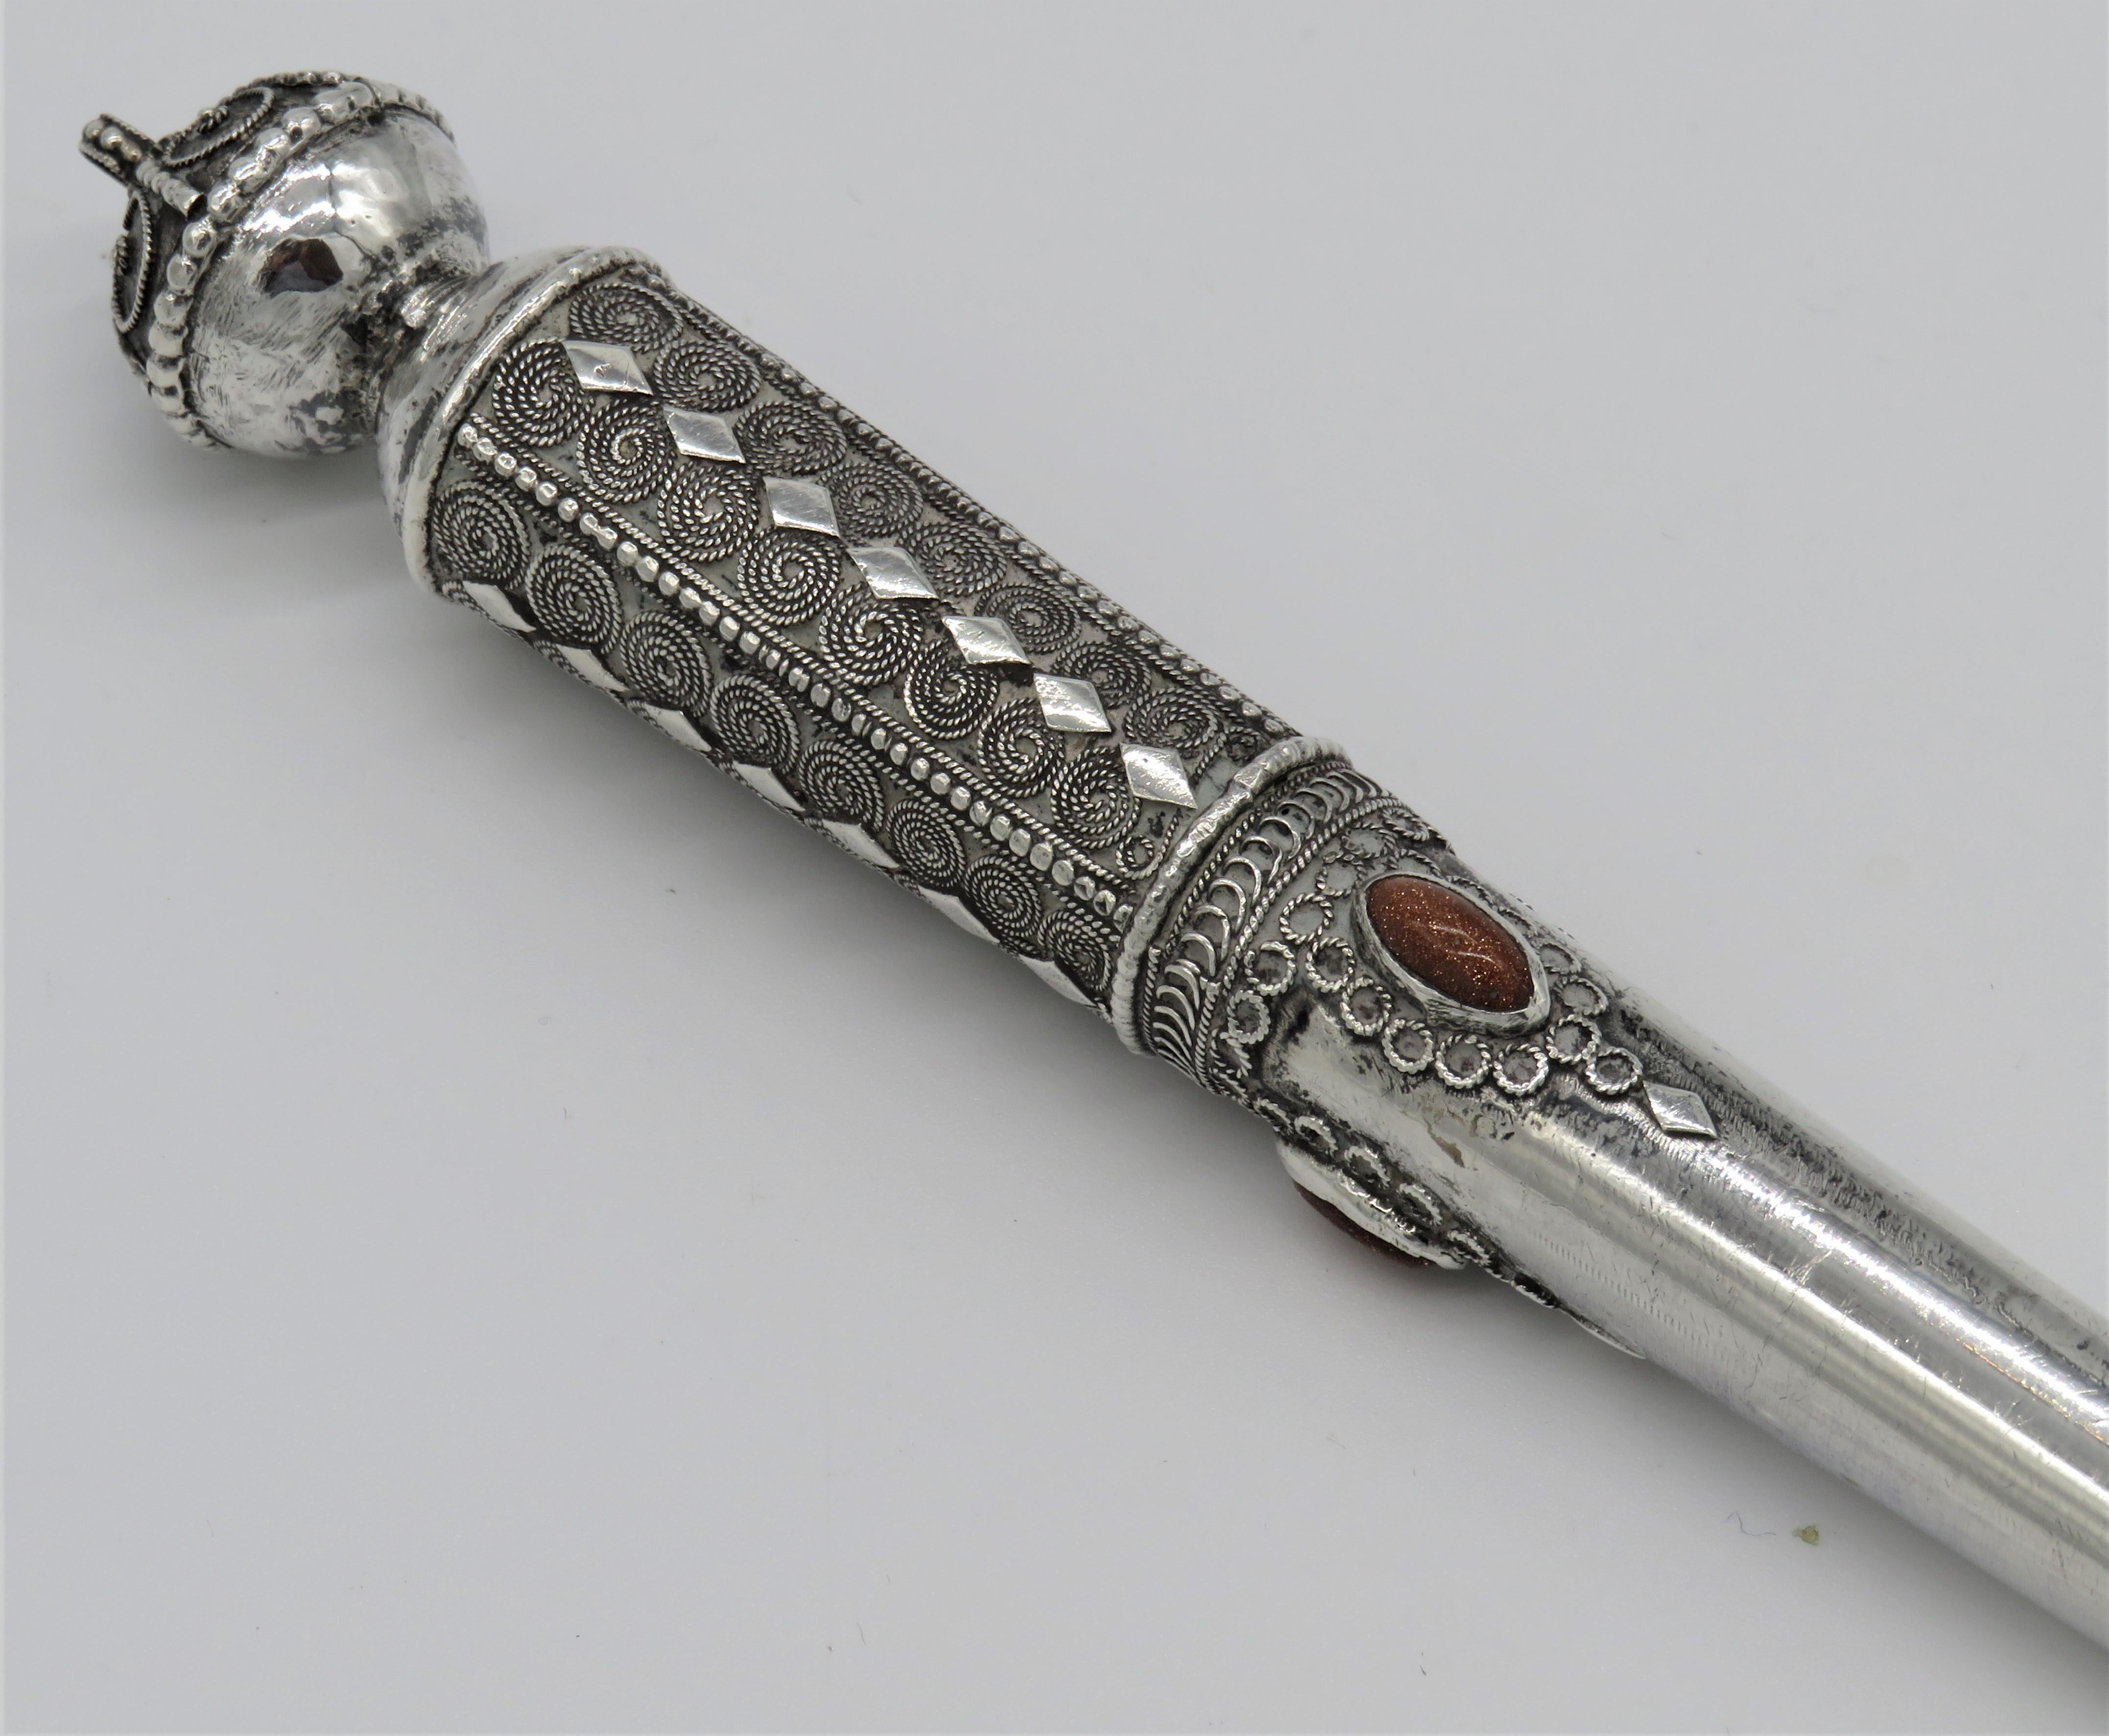 Handmade silver and silver filigree Torah pointer, Yehia Yemini, Jerusalem, circa 1940.
Decorated with Yemeni design, silver filigree work on the top, around the shaft, and next to the finger.
Set with carnelian stones around the shaft.
Stamped on